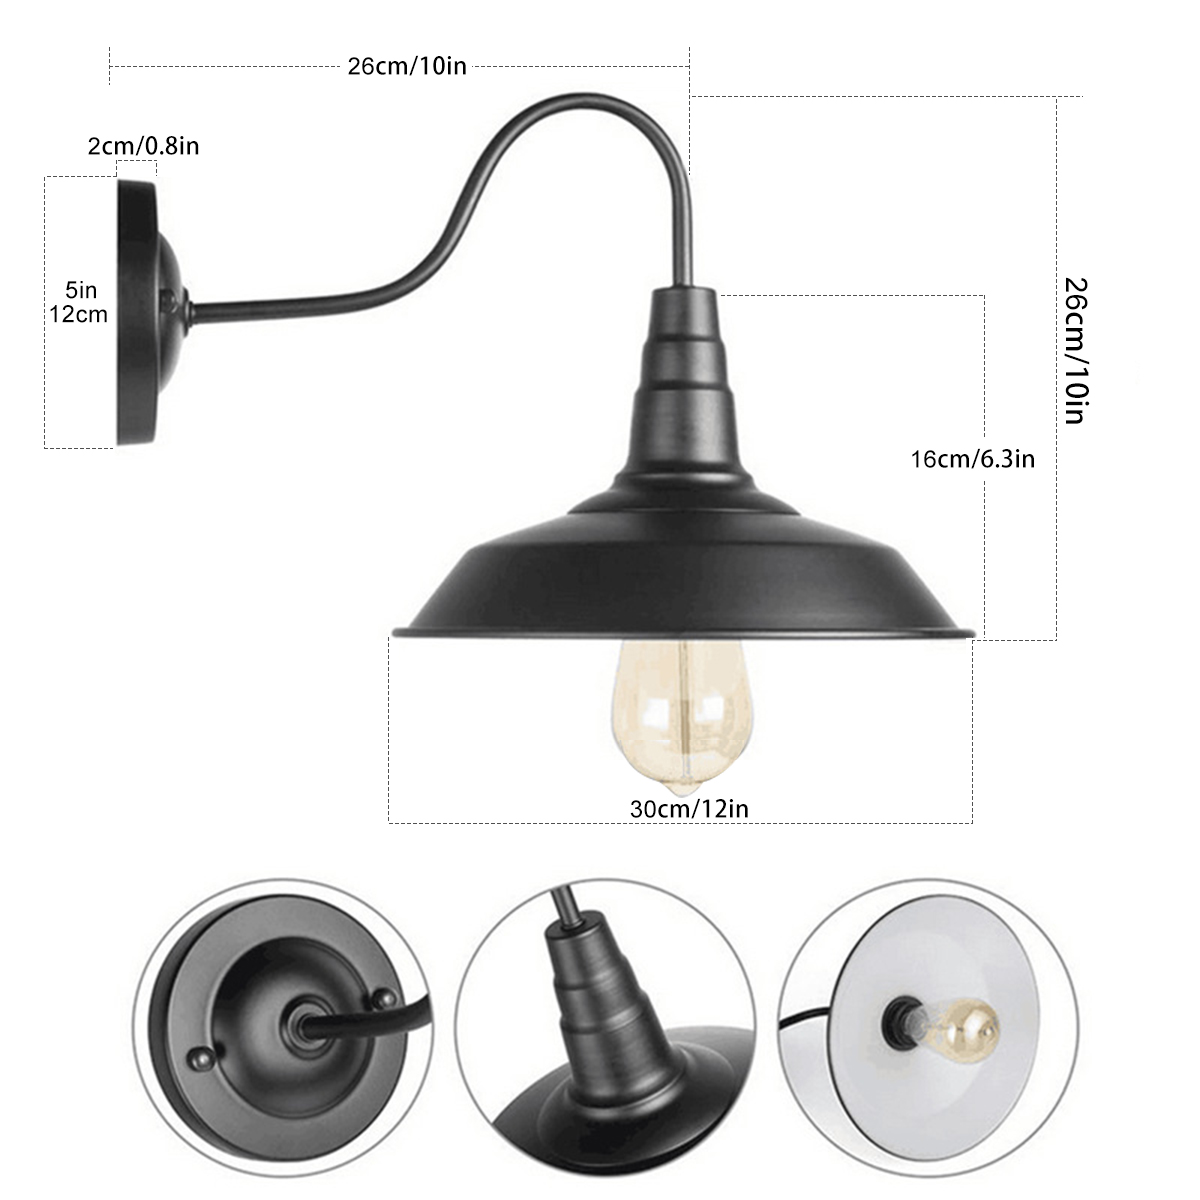 Find Loft Retro Industrial Wind Pot Cover Wall Lamp American Simple Wrought Iron Wall Light Aisle Corridor Warehouse Balcony Restaurant Without Bulb for Sale on Gipsybee.com with cryptocurrencies